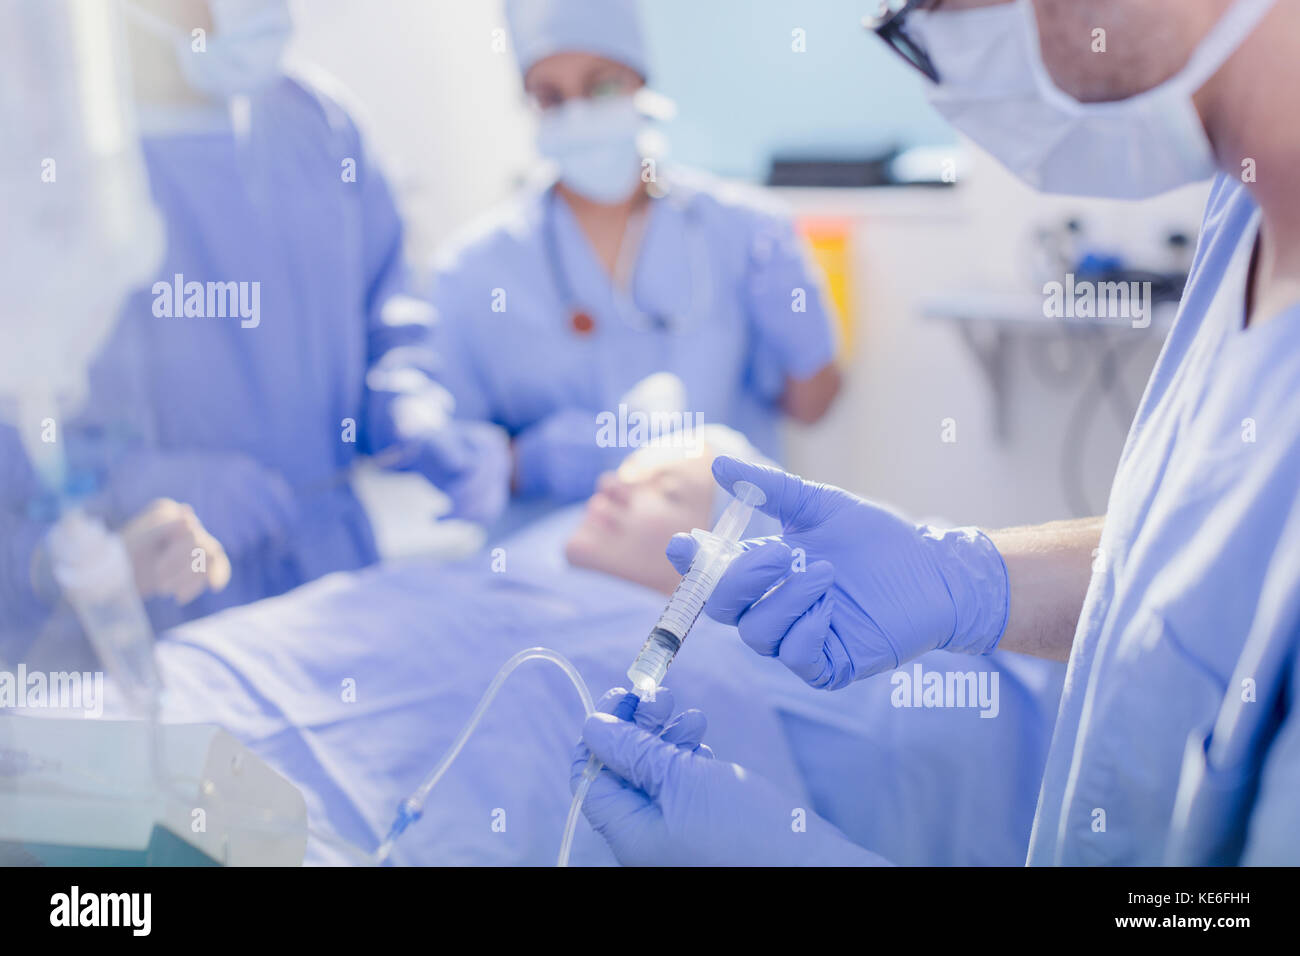 Anesthesiologist with syringe injecting anesthesia into IV drip in operating room Stock Photo